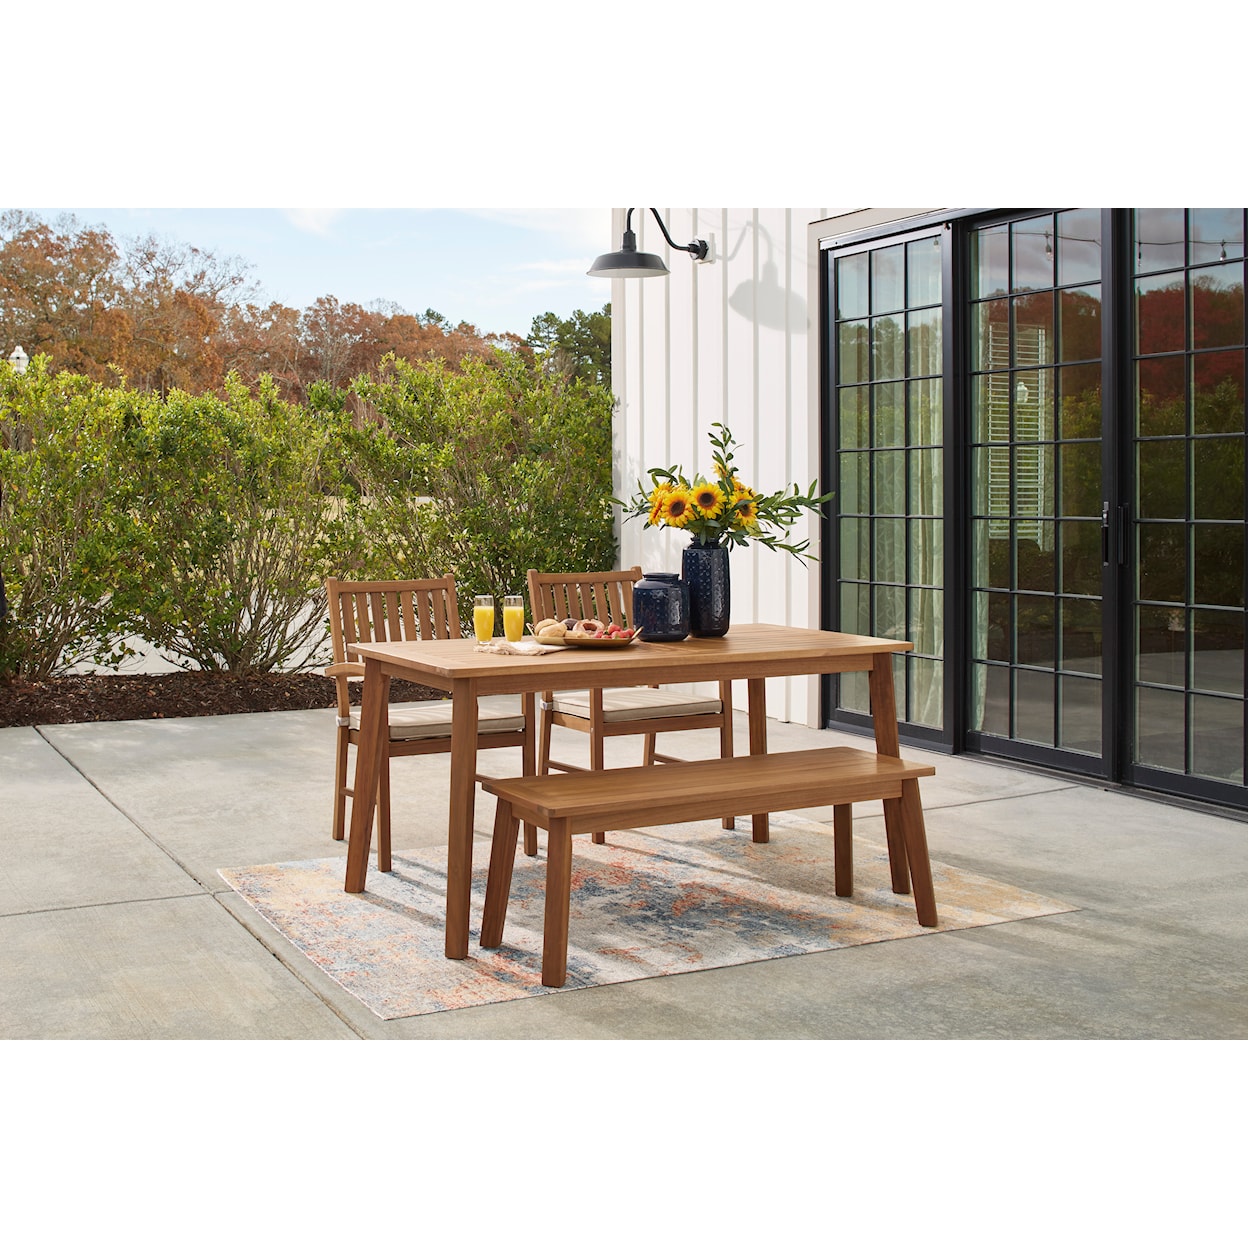 Signature Design by Ashley Janiyah Outdoor Dining Bench